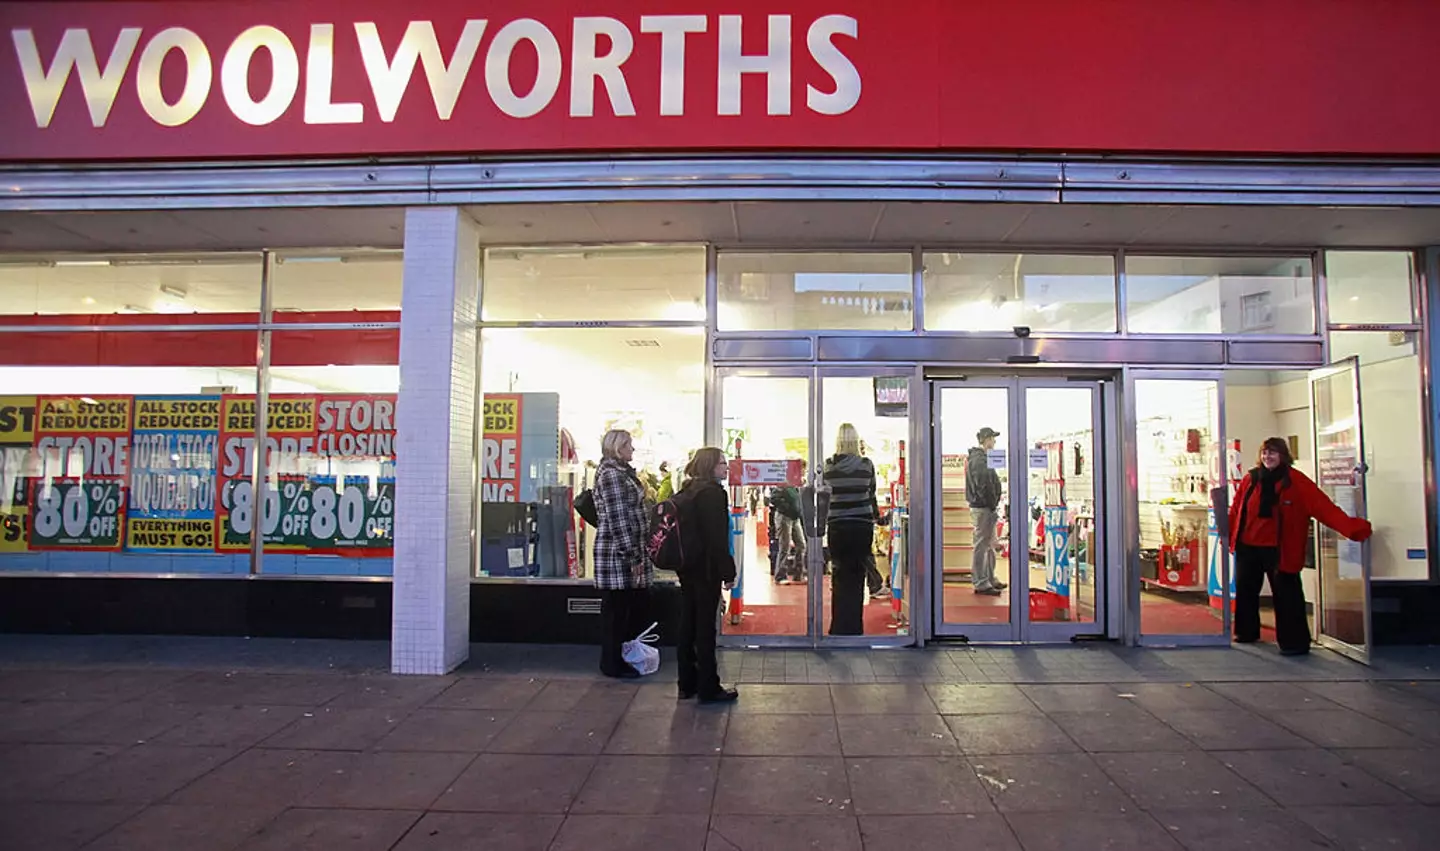 Woolworths closed in the UK back in 2009.